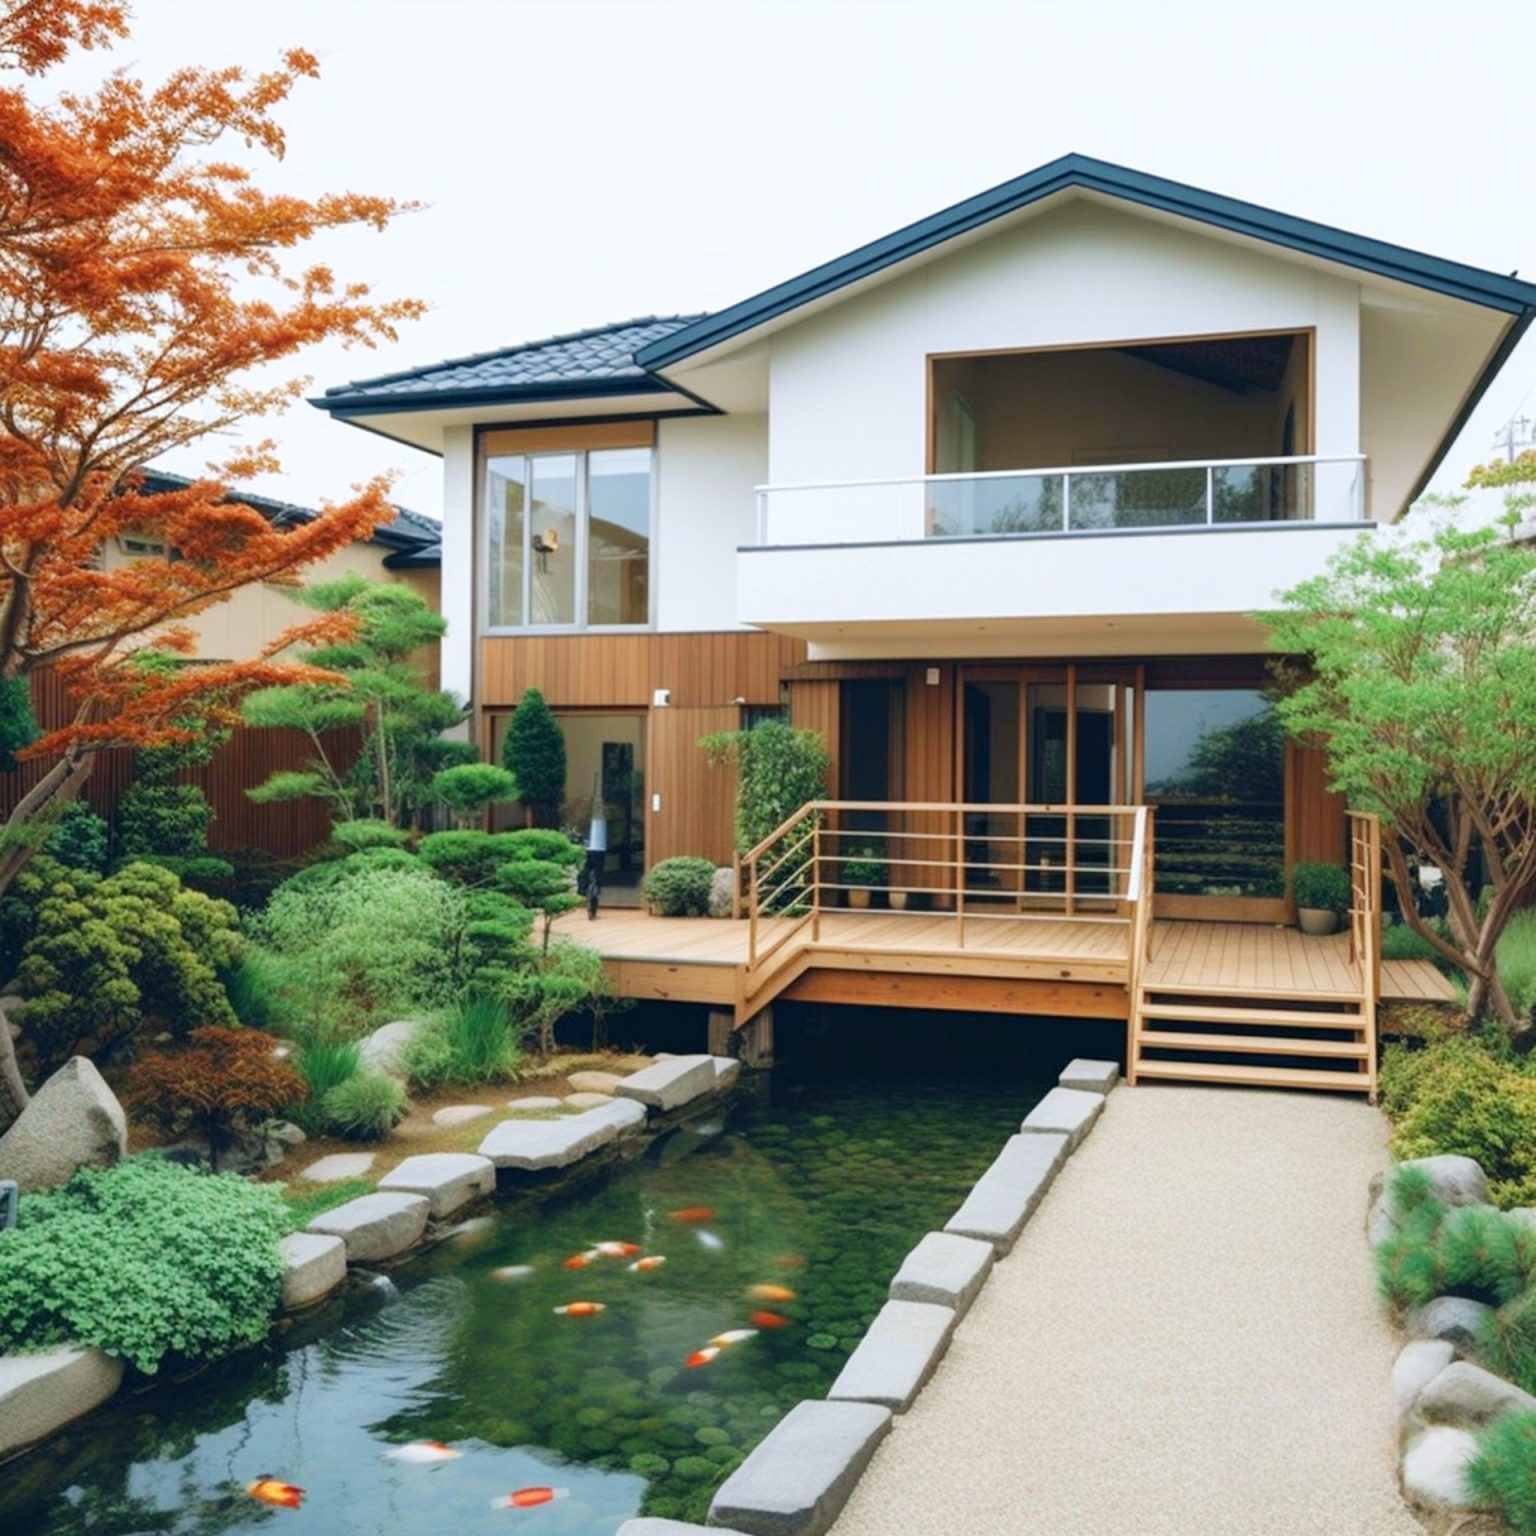 23 Japanese Homes Design Blends Perfectly With Modernity And Steps Into